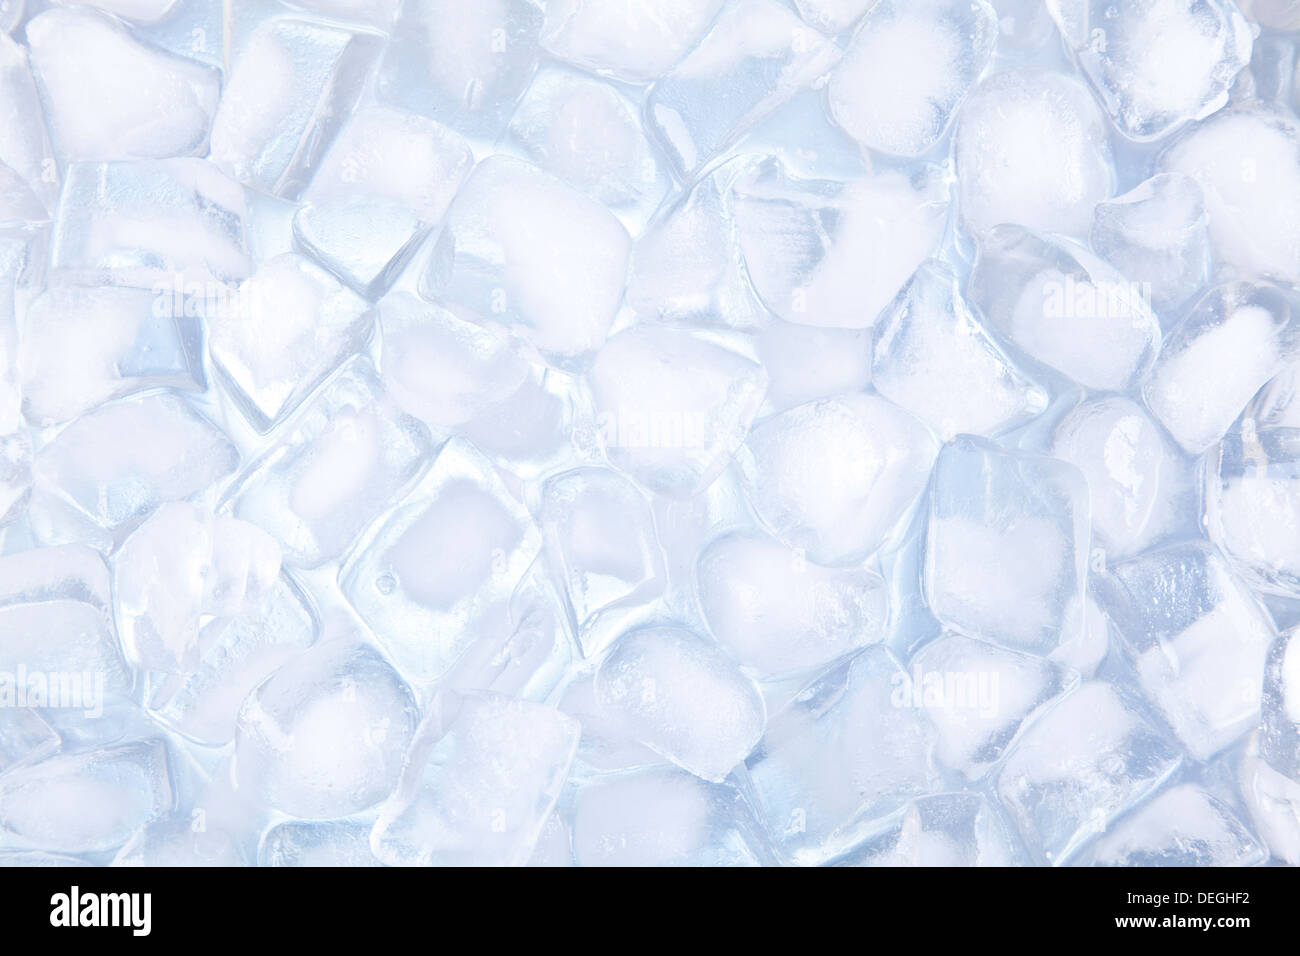 A cold color temperature ice cubes background. Stock Photo